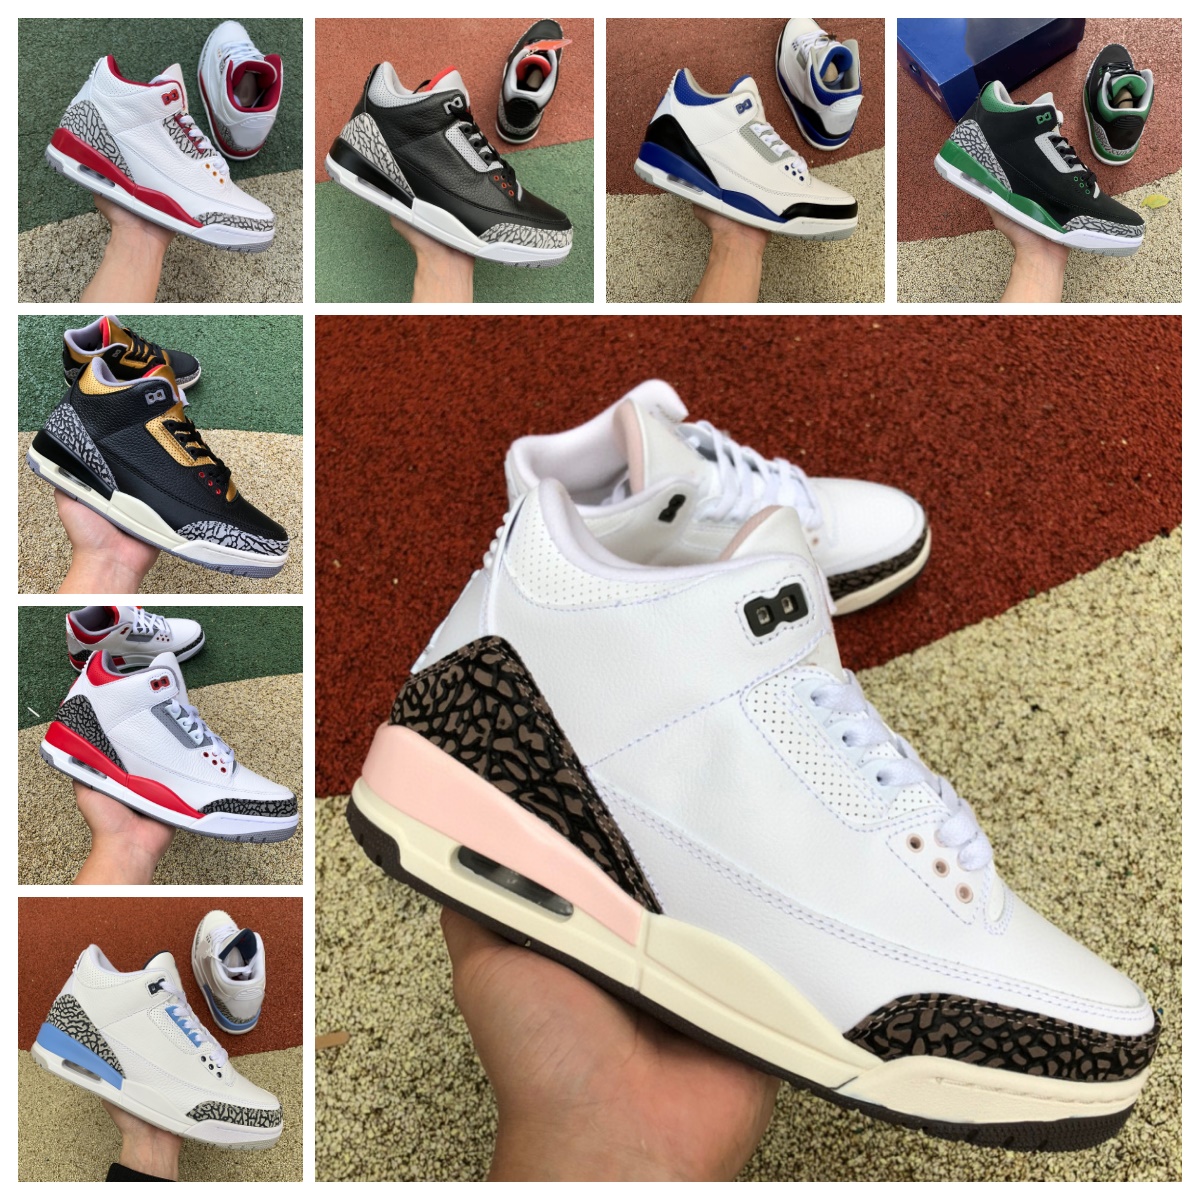 

Jumpman 3 3s III Fire Red Basketball Shoes Mens Racer Blue UNC Varsity Royal Cool Grey Cardinal Red Black White Cement Neapolitan Dark Mocha Pine Green sports Sneakers, Bubble package bag